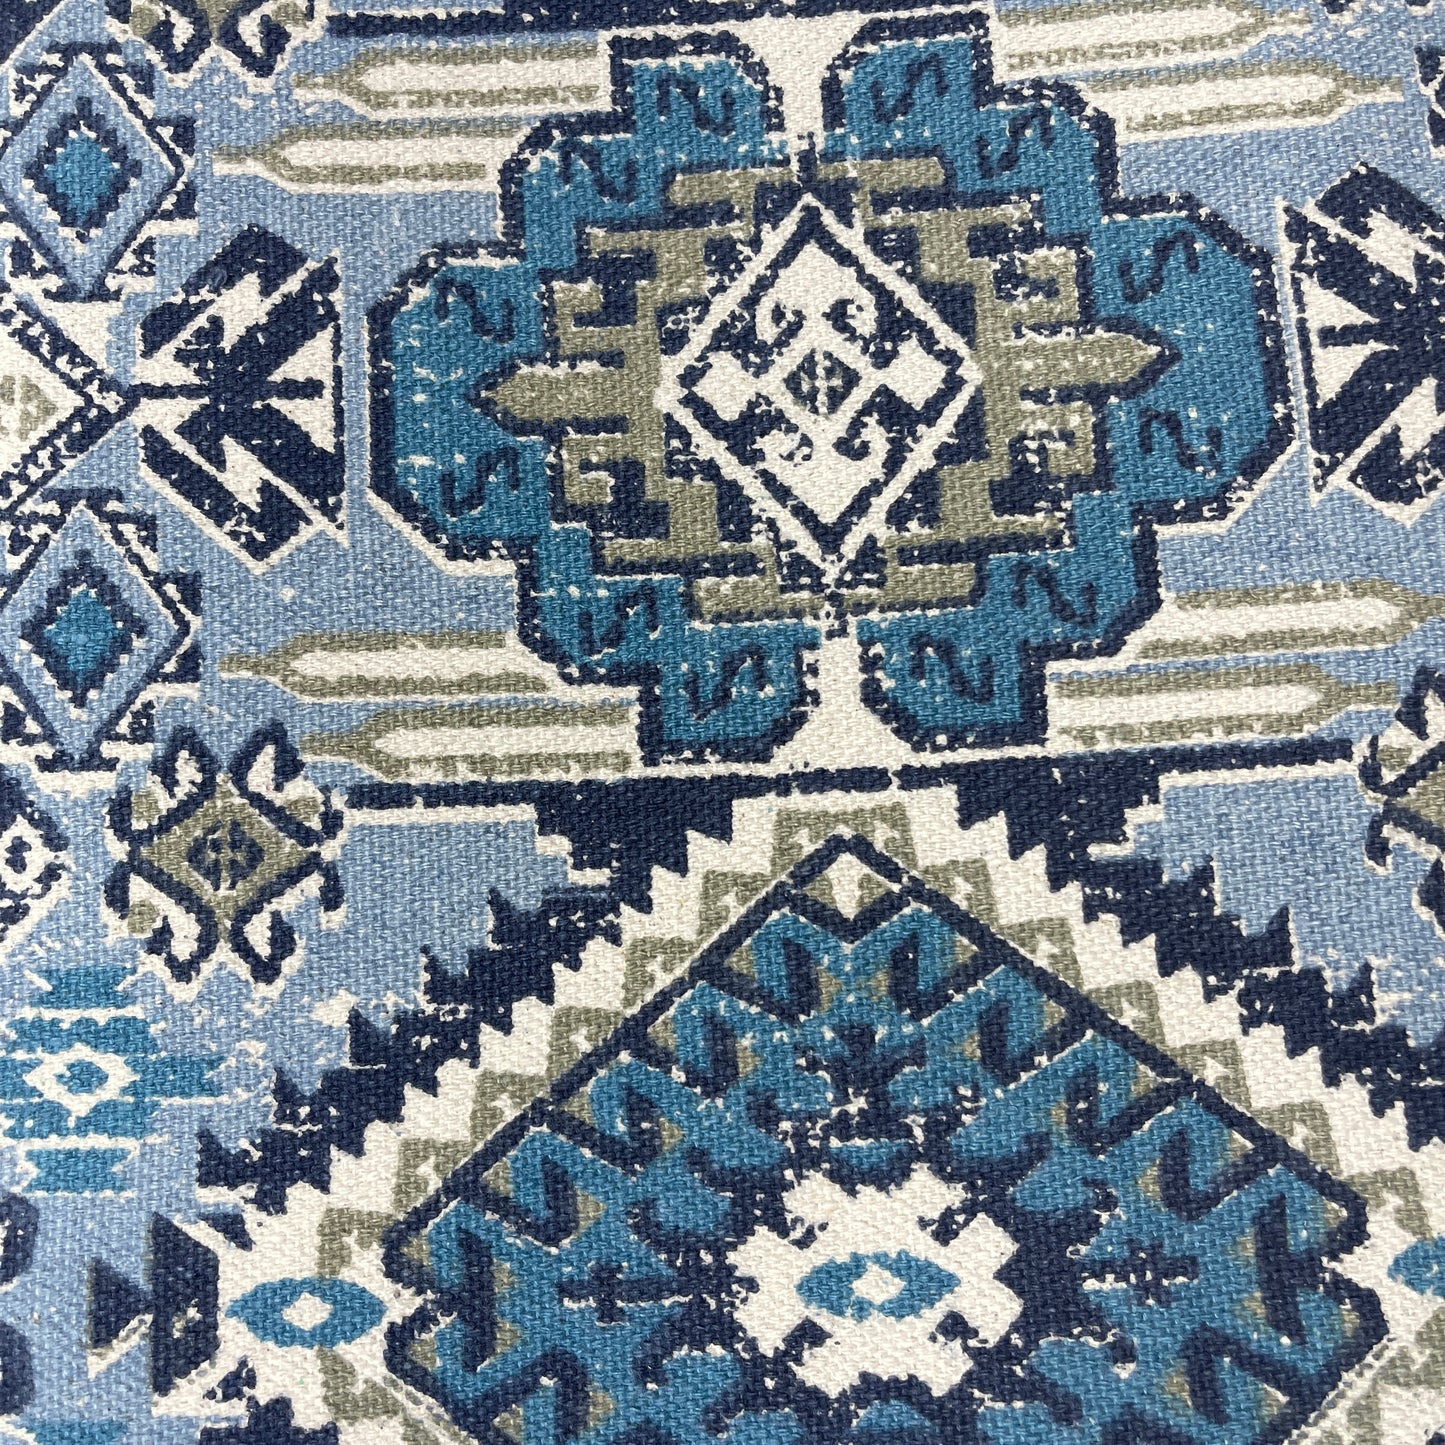 NICOLE MILLER HOME Table Runner 16" x 72" Blue Aztec Pattern 502524 (New)